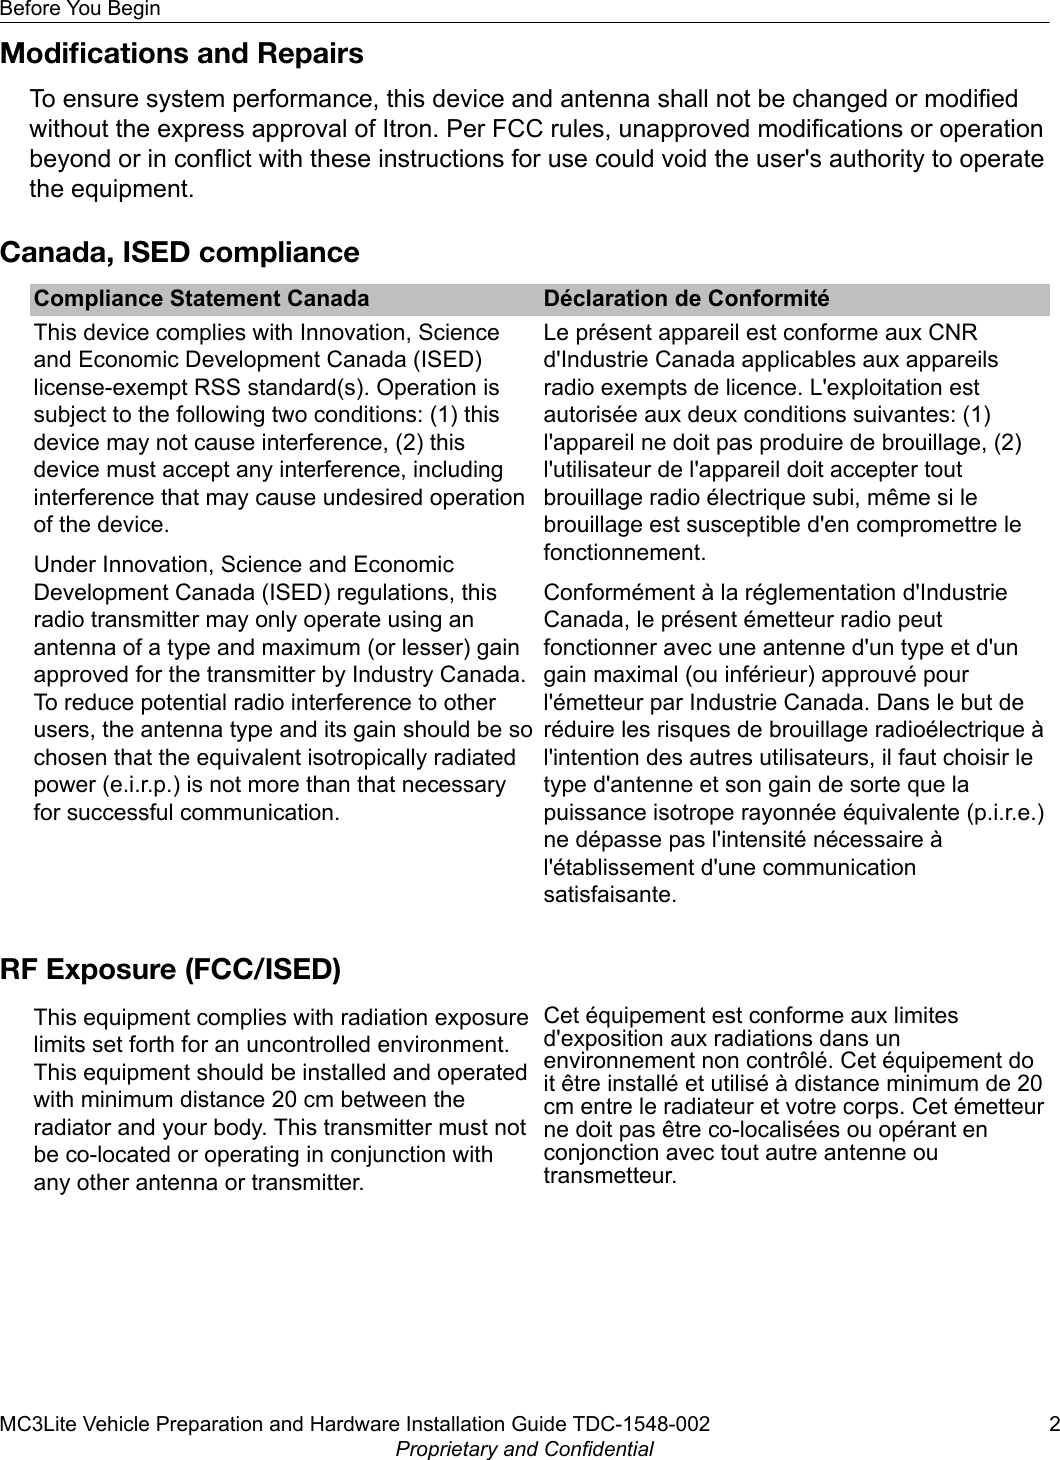 Modiﬁcations and RepairsTo ensure system performance, this device and antenna shall not be changed or modifiedwithout the express approval of Itron. Per FCC rules, unapproved modifications or operationbeyond or in conflict with these instructions for use could void the user&apos;s authority to operatethe equipment.Canada, ISED complianceCompliance Statement Canada Déclaration de ConformitéThis device complies with Innovation, Scienceand Economic Development Canada (ISED)license-exempt RSS standard(s). Operation issubject to the following two conditions: (1) thisdevice may not cause interference, (2) thisdevice must accept any interference, includinginterference that may cause undesired operationof the device.Under Innovation, Science and EconomicDevelopment Canada (ISED) regulations, thisradio transmitter may only operate using anantenna of a type and maximum (or lesser) gainapproved for the transmitter by Industry Canada.To reduce potential radio interference to otherusers, the antenna type and its gain should be sochosen that the equivalent isotropically radiatedpower (e.i.r.p.) is not more than that necessaryfor successful communication.Le présent appareil est conforme aux CNRd&apos;Industrie Canada applicables aux appareilsradio exempts de licence. L&apos;exploitation estautorisée aux deux conditions suivantes: (1)l&apos;appareil ne doit pas produire de brouillage, (2)l&apos;utilisateur de l&apos;appareil doit accepter toutbrouillage radio électrique subi, même si lebrouillage est susceptible d&apos;en compromettre lefonctionnement.Conformément à la réglementation d&apos;IndustrieCanada, le présent émetteur radio peutfonctionner avec une antenne d&apos;un type et d&apos;ungain maximal (ou inférieur) approuvé pourl&apos;émetteur par Industrie Canada. Dans le but deréduire les risques de brouillage radioélectrique àl&apos;intention des autres utilisateurs, il faut choisir letype d&apos;antenne et son gain de sorte que lapuissance isotrope rayonnée équivalente (p.i.r.e.)ne dépasse pas l&apos;intensité nécessaire àl&apos;établissement d&apos;une communicationsatisfaisante.RF Exposure (FCC/ISED)This equipment complies with radiation exposurelimits set forth for an uncontrolled environment.This equipment should be installed and operatedwith minimum distance 20 cm between theradiator and your body. This transmitter must notbe co-located or operating in conjunction withany other antenna or transmitter.Cet équipement est conforme aux limitesd&apos;exposition aux radiations dans unenvironnement non contrôlé. Cet équipement doit être installé et utilisé à distance minimum de 20cm entre le radiateur et votre corps. Cet émetteurne doit pas être co-localisées ou opérant enconjonction avec tout autre antenne outransmetteur.Before You BeginMC3Lite Vehicle Preparation and Hardware Installation Guide TDC-1548-002 2Proprietary and Confidential